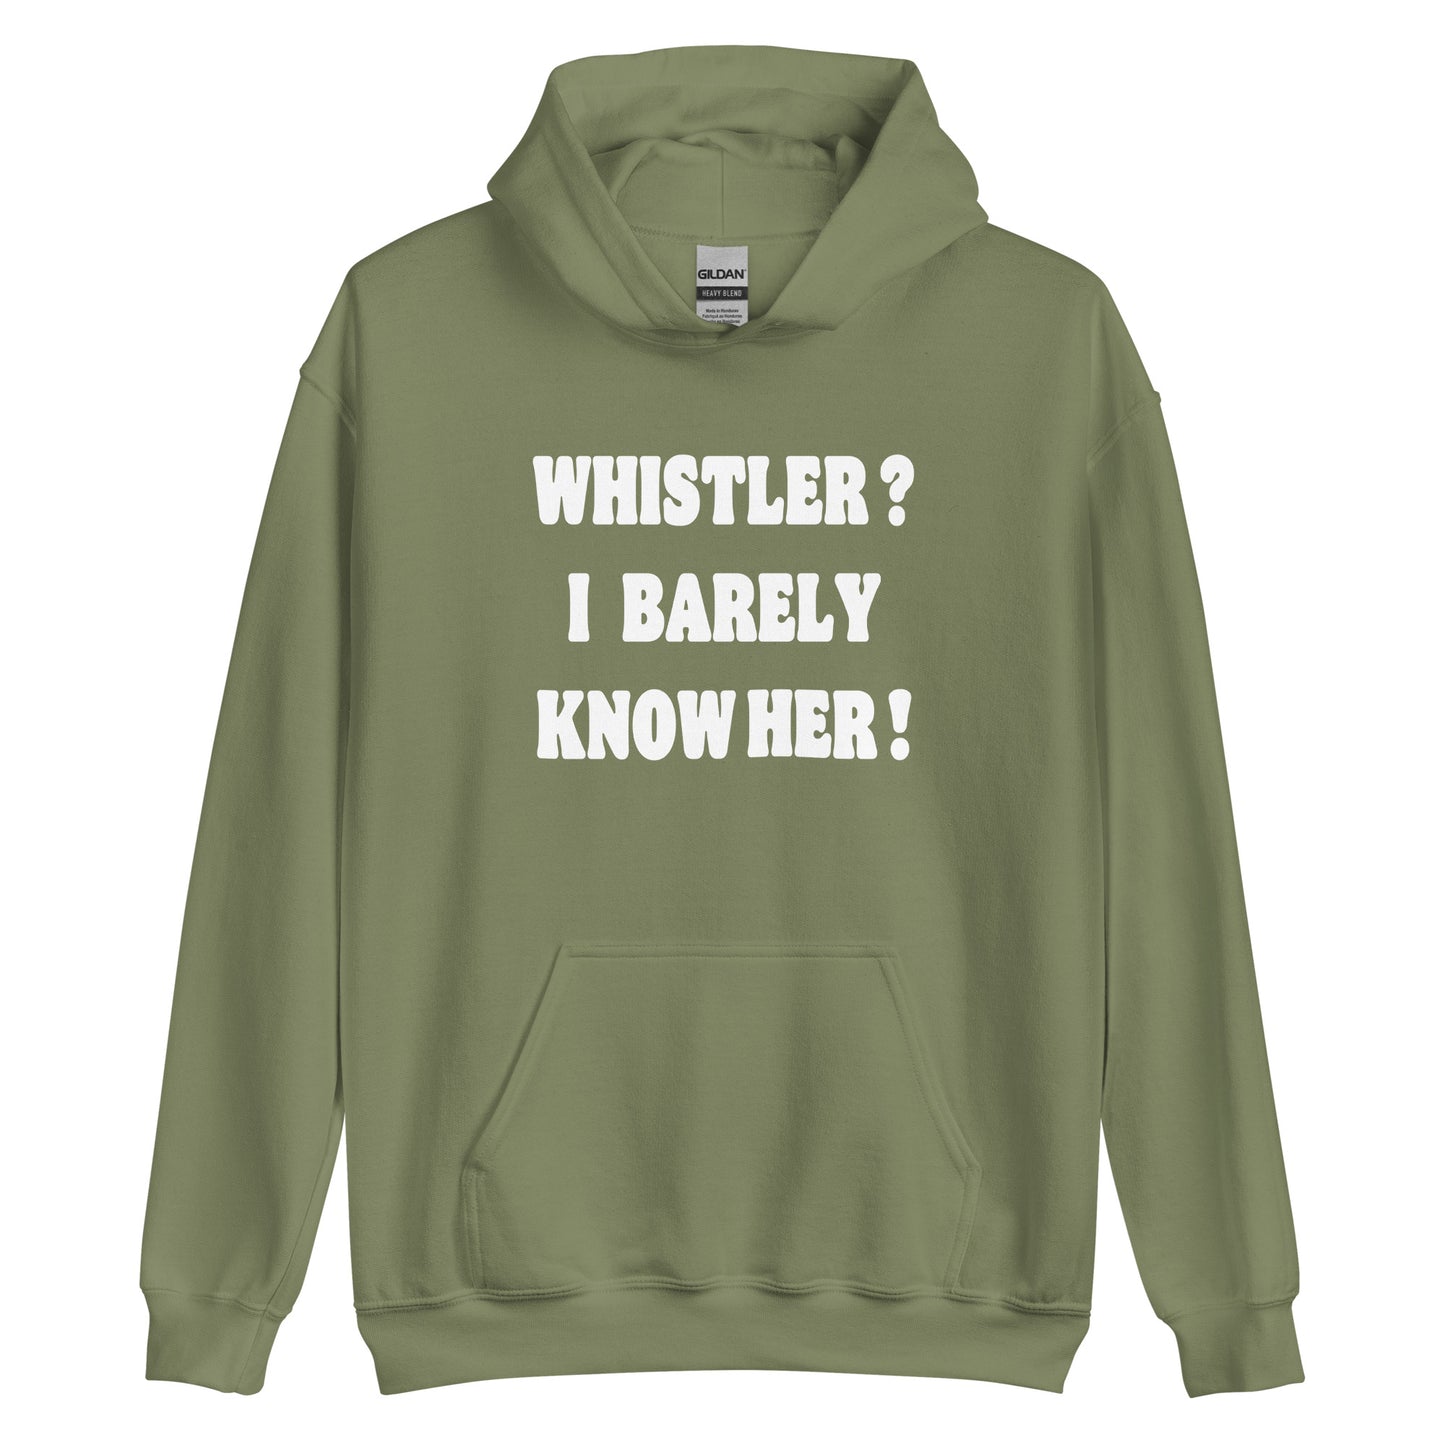 Whistler? I barely know her! Printed hoodie by Whistler Shirts